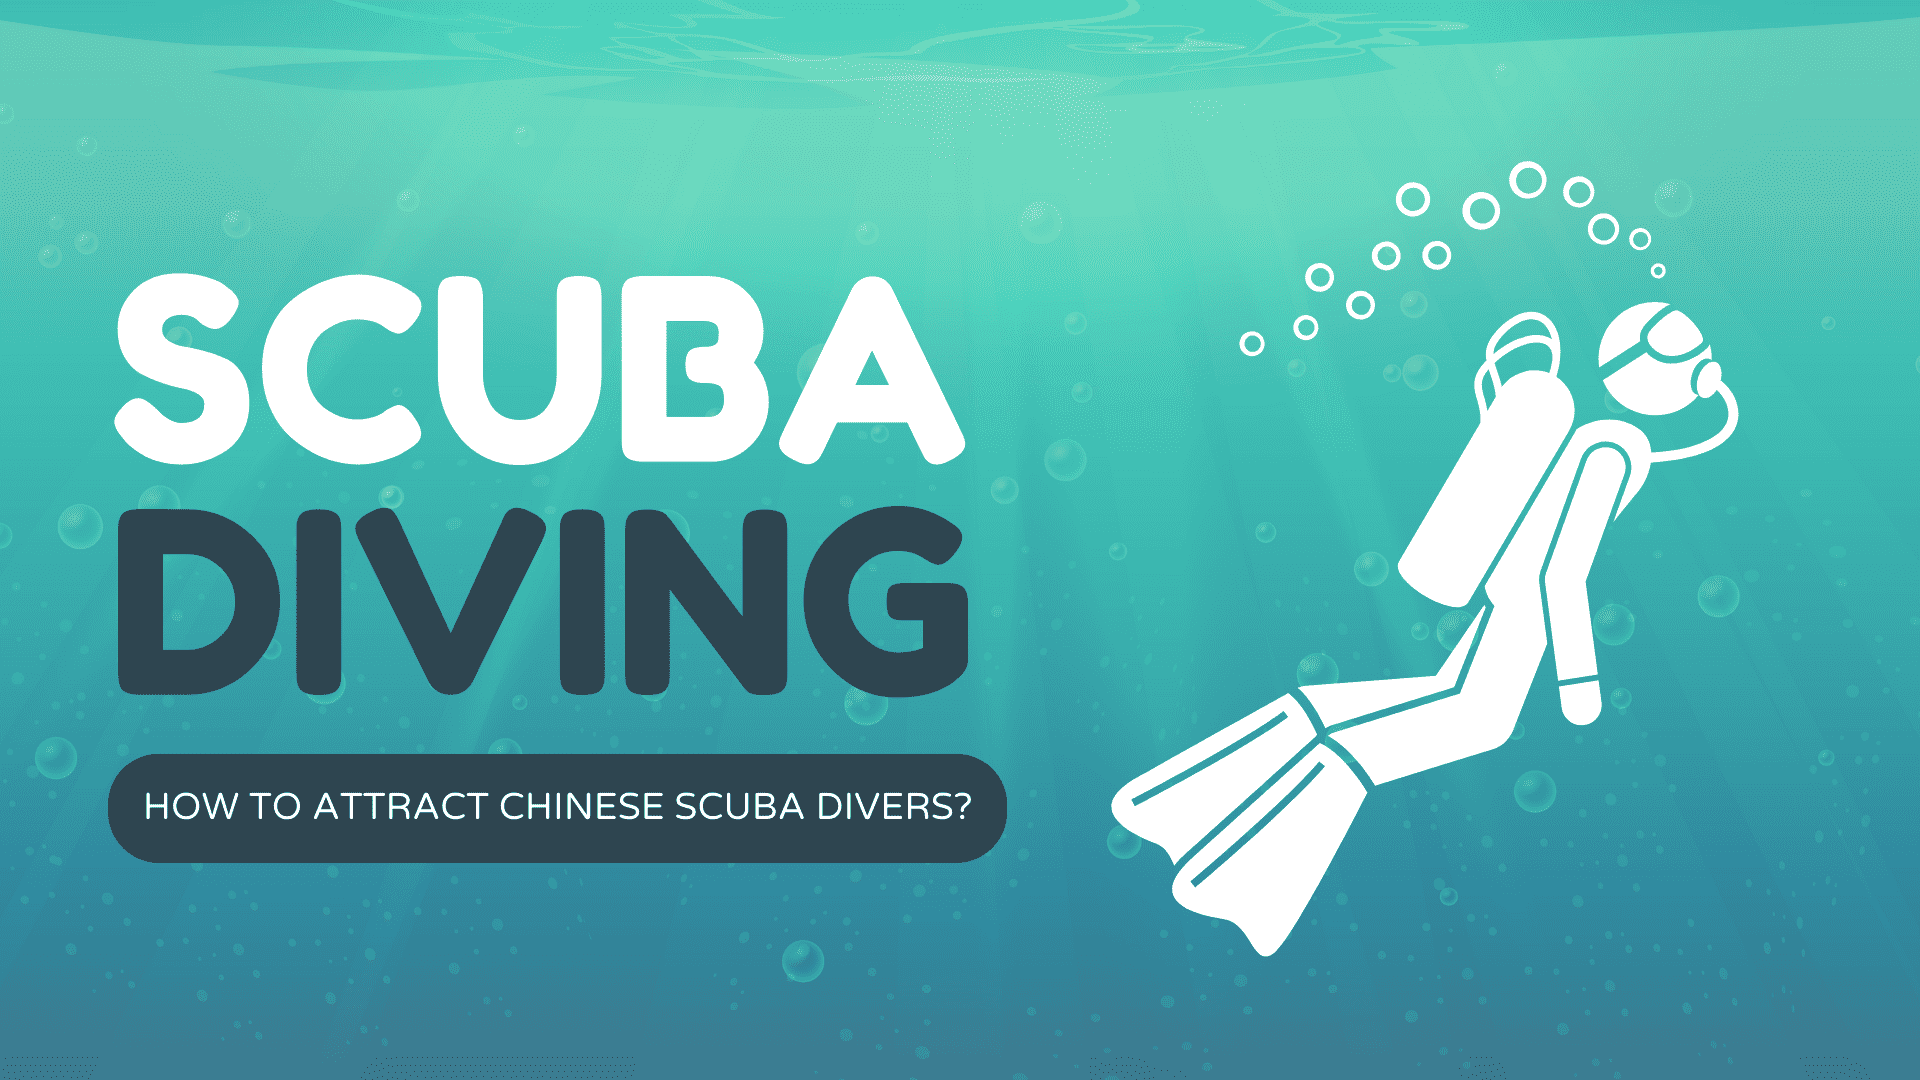 Chinese scuba diving: banner